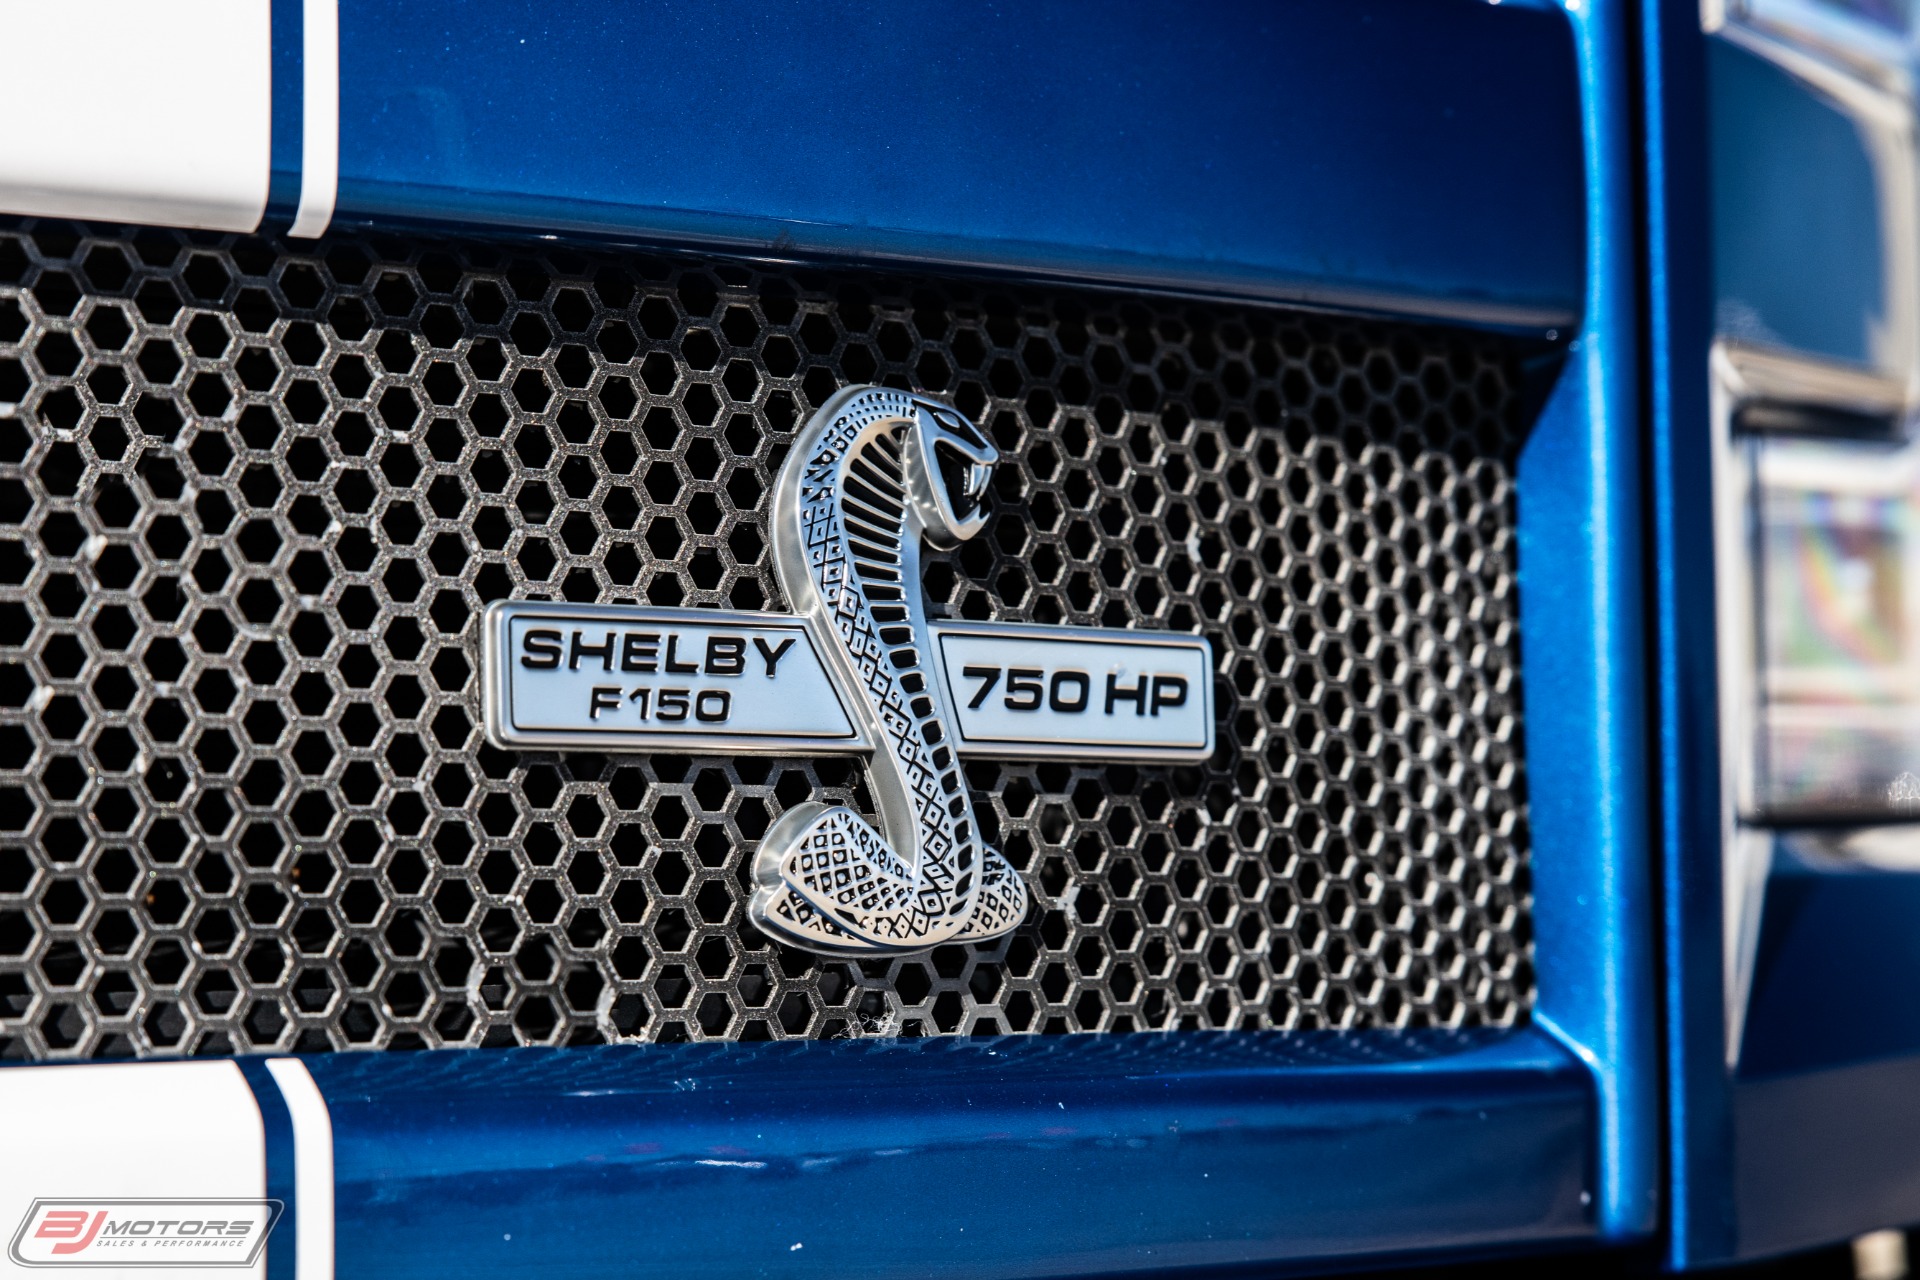 Used-2017-Ford-F-150-Shelby-750-HP-Supercharged